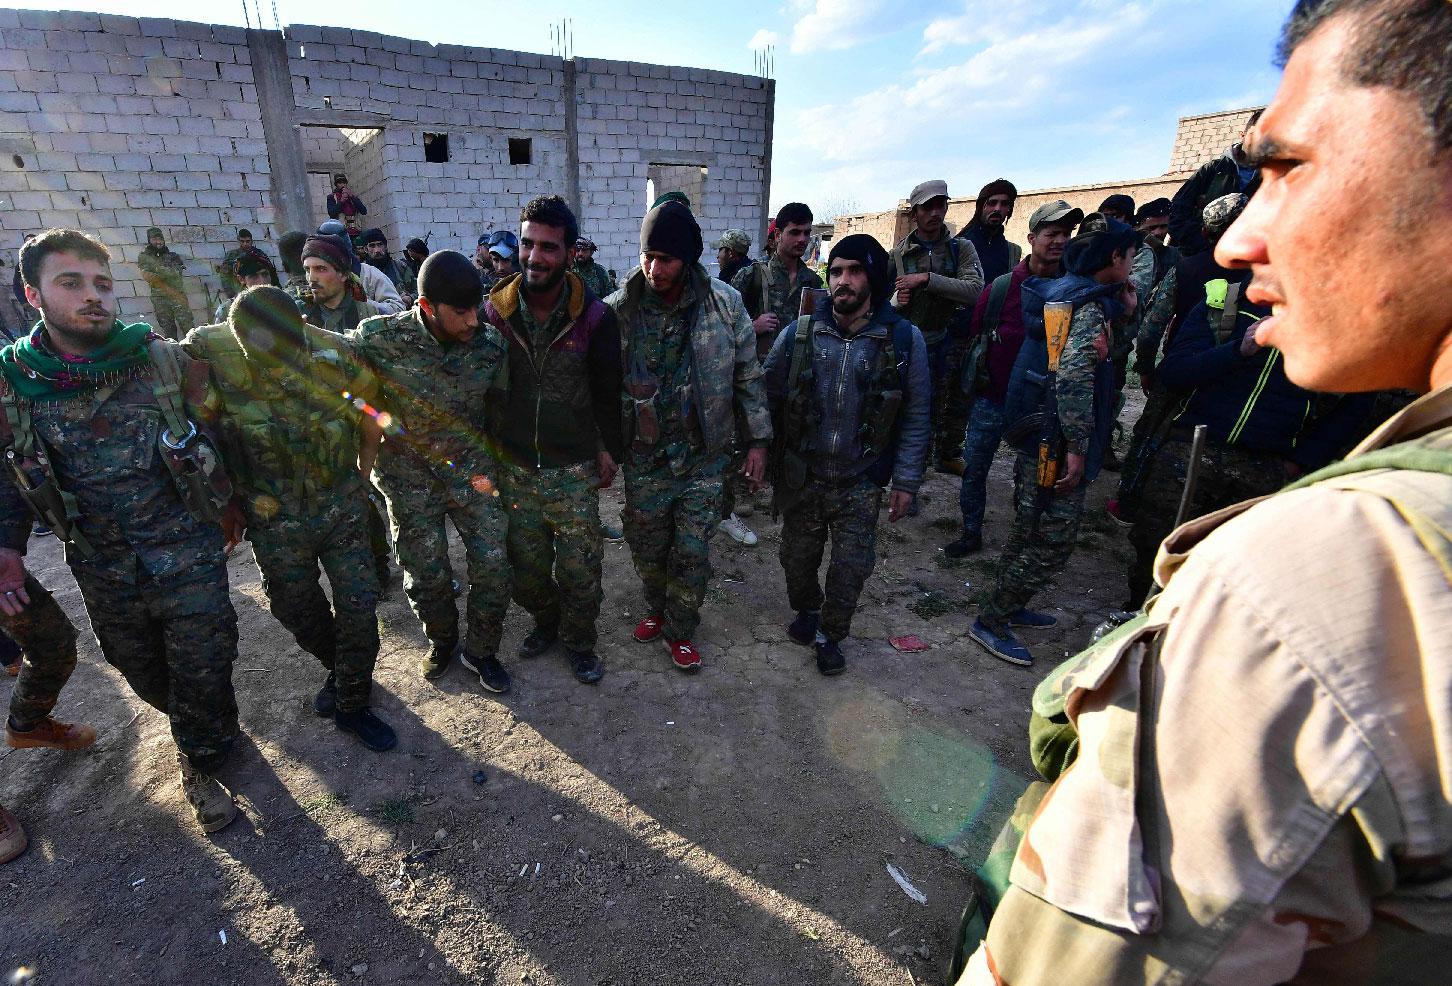 Fighters from the Syrian Democratic Forces (SDF) celebrate as they come back from the frontline in the Islamic State group's last remaining position in the village of Baghouz in the countryside of the eastern Syrian province of Deir Ezzor on March 19, 2019.